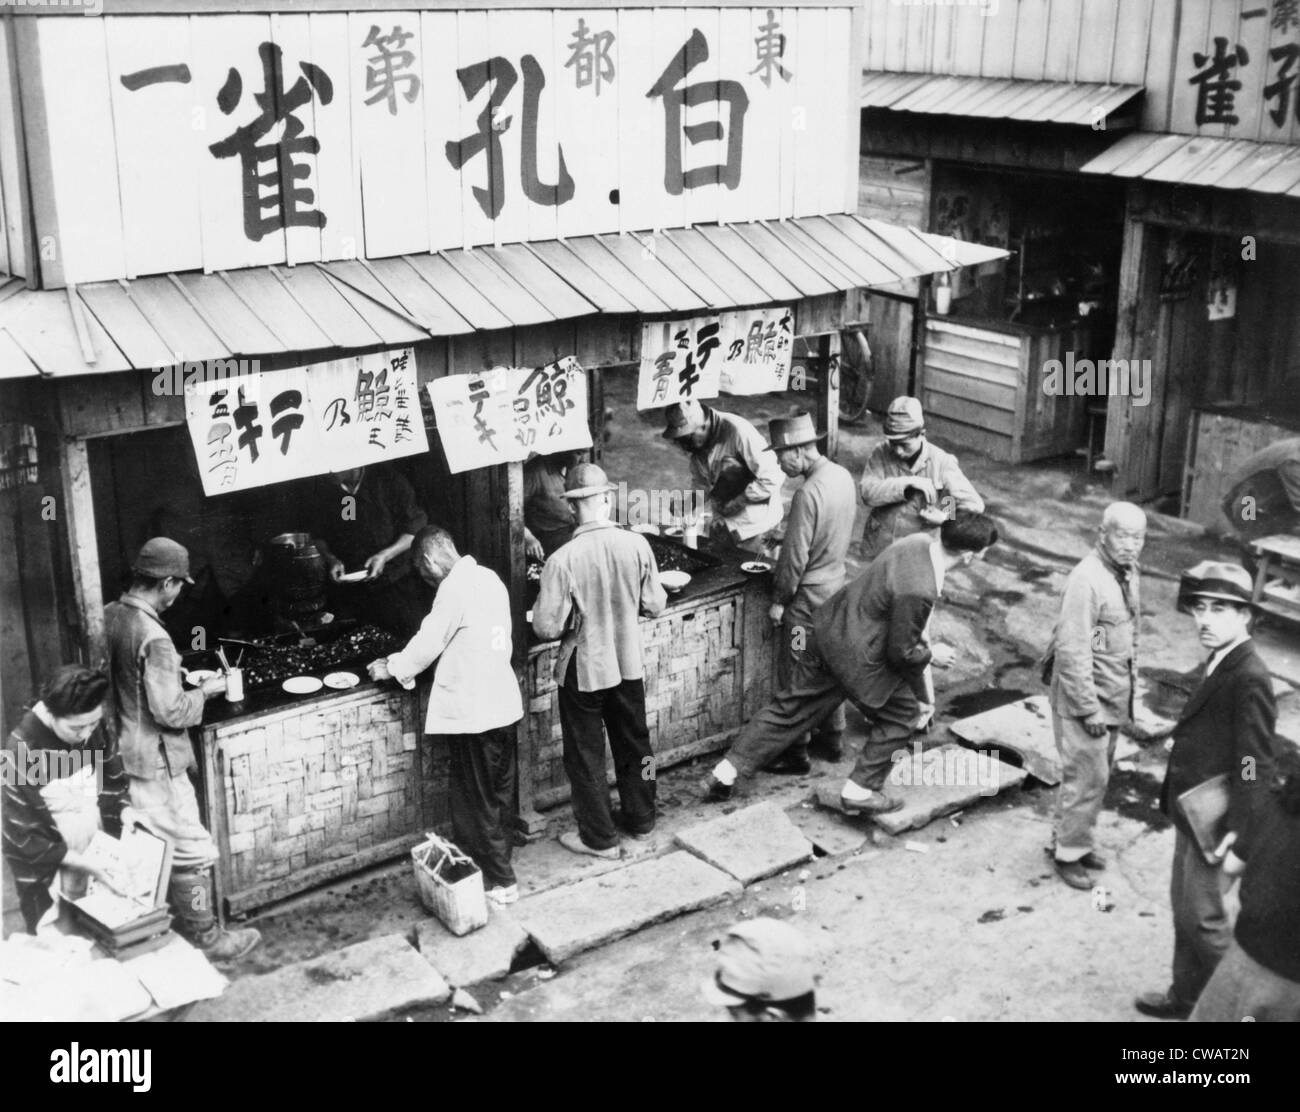 Food stall in post-World War II Tokyo has customers, but no rice. As late as the mid-1950's, Japan's economy was still Stock Photo